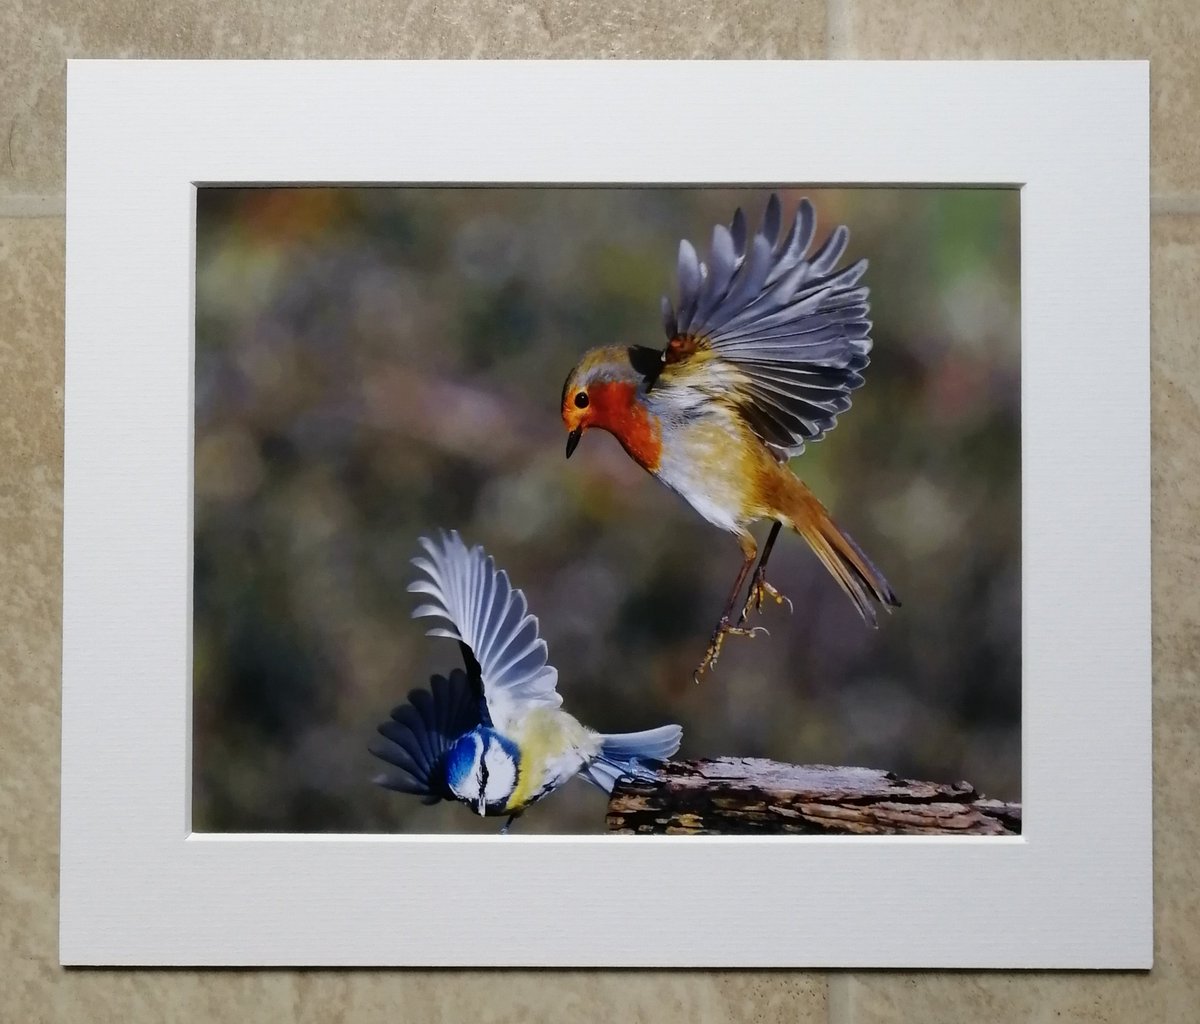 'Robin dropping in on a Blue Tit' 10x8 mounted print.  You can buy it here; https://www.carlbovis.com/product-page/robin-dropping-in-on-a-blue-tit-10x8-mounted-print 